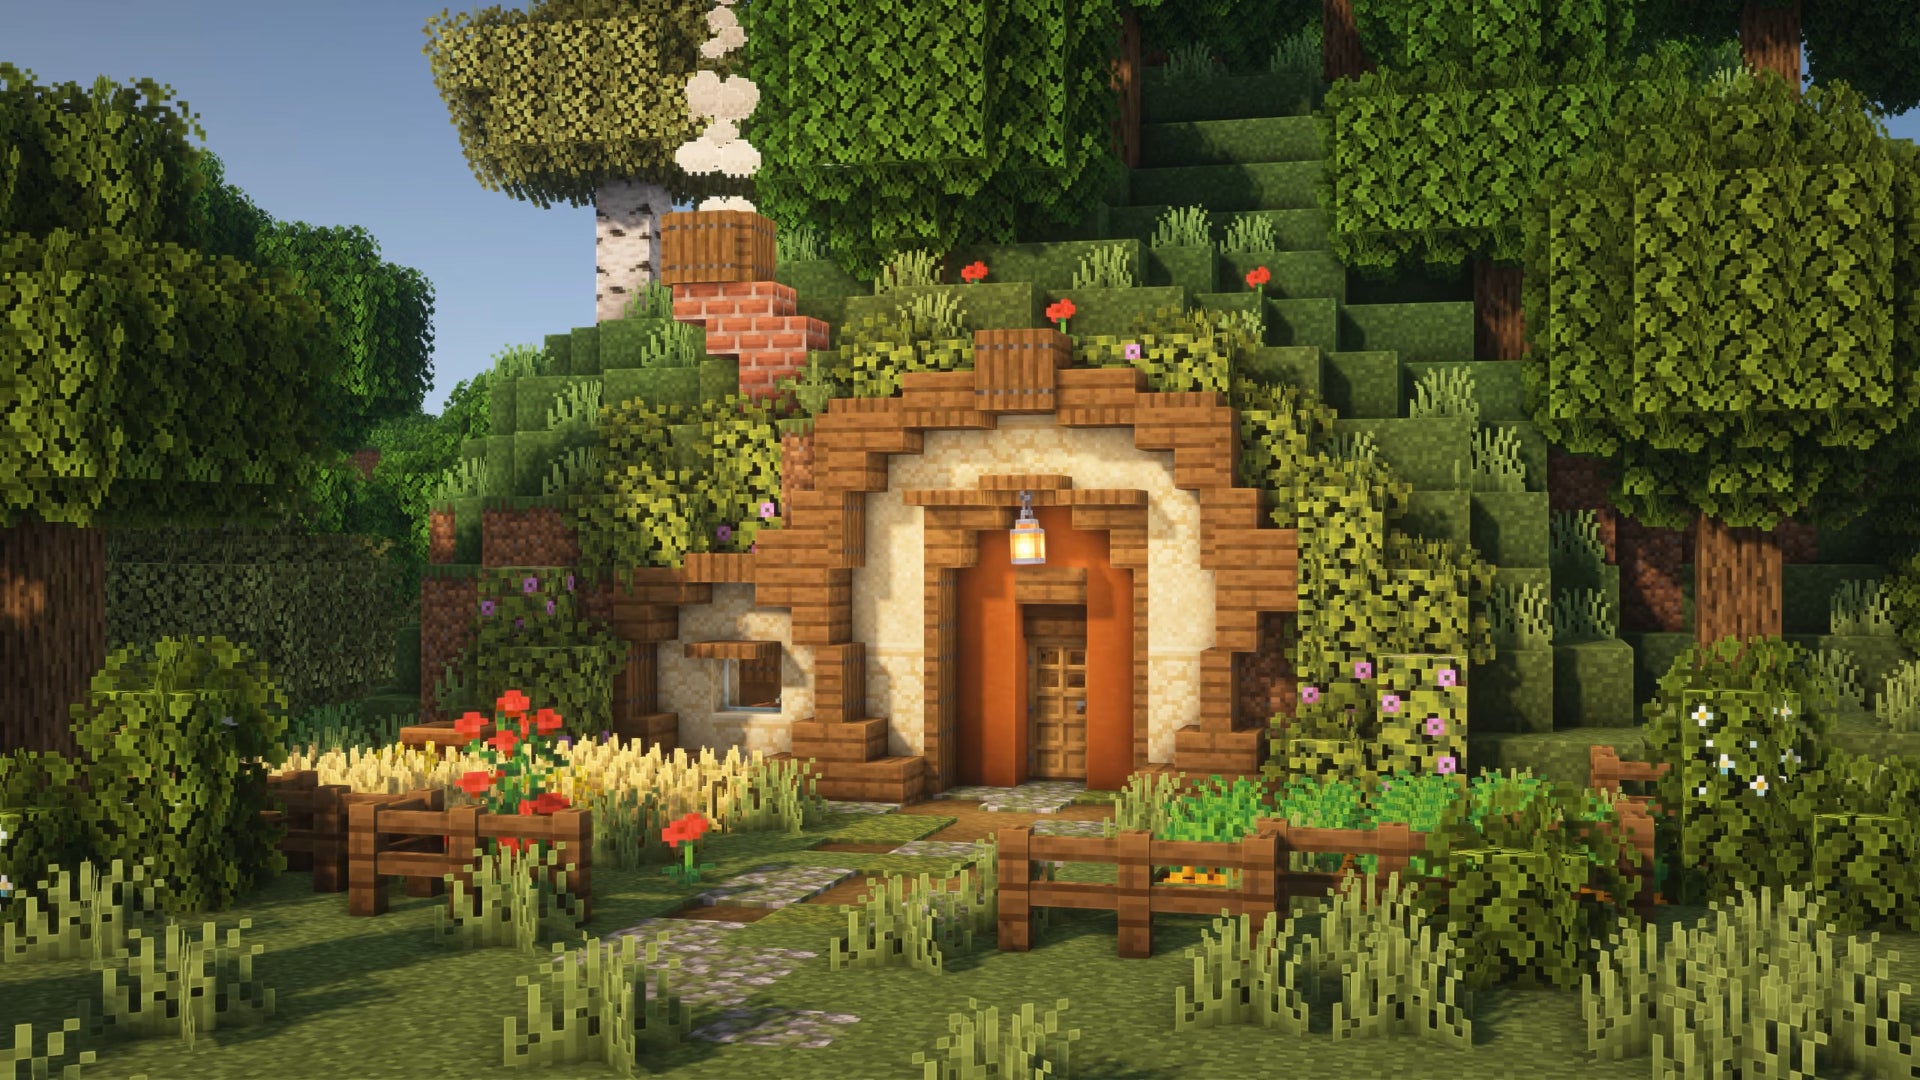 A house in Minecraft inspired by a hobbit hole from Lord Of The Rings, built by YouTuber Goldrobin.